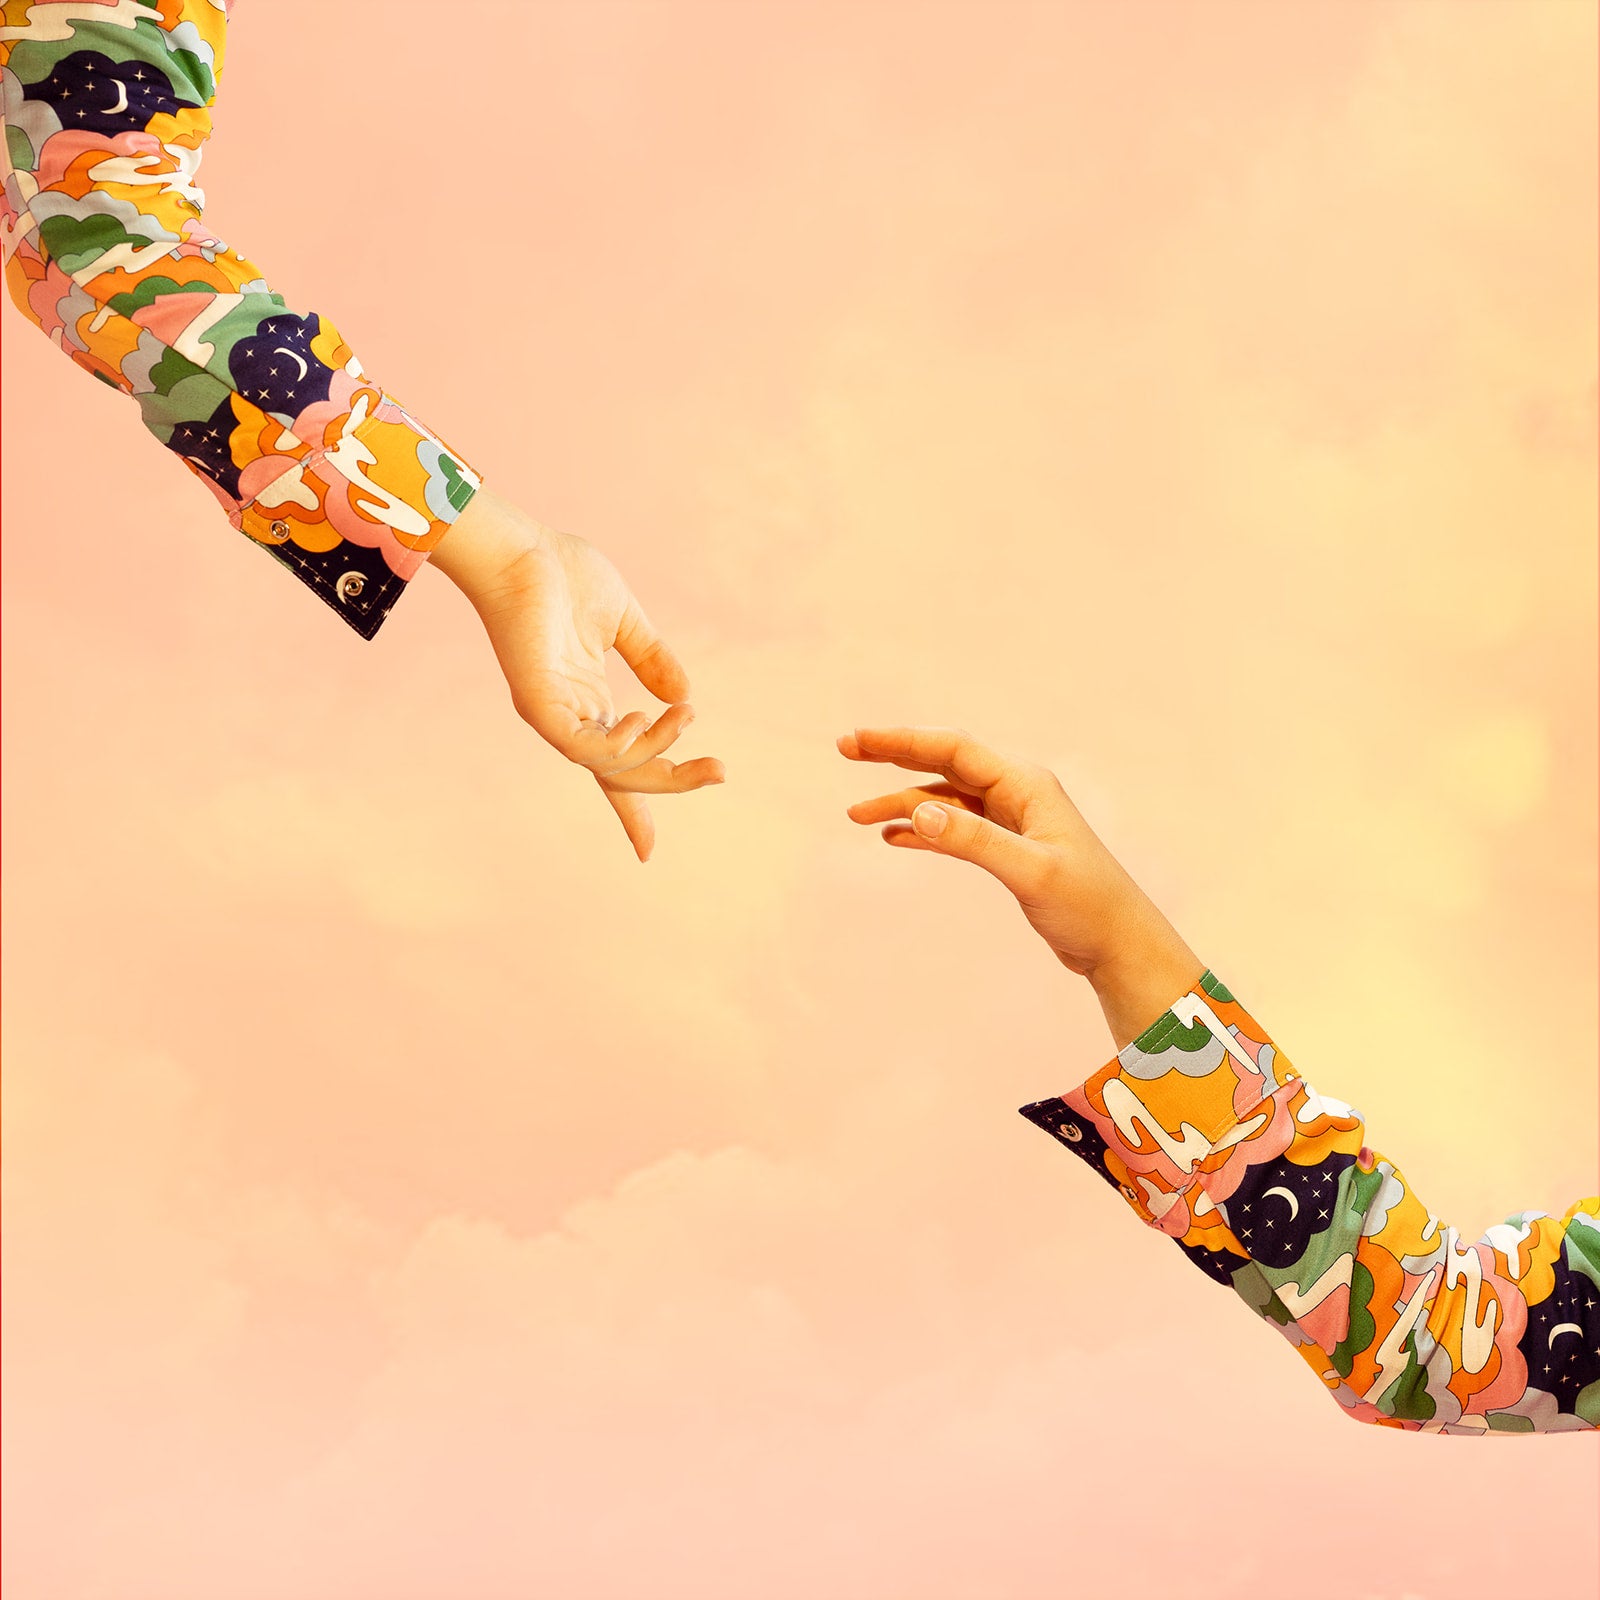 Two hands, wearing colorful cloud-printed shirts, are reaching towards each other.